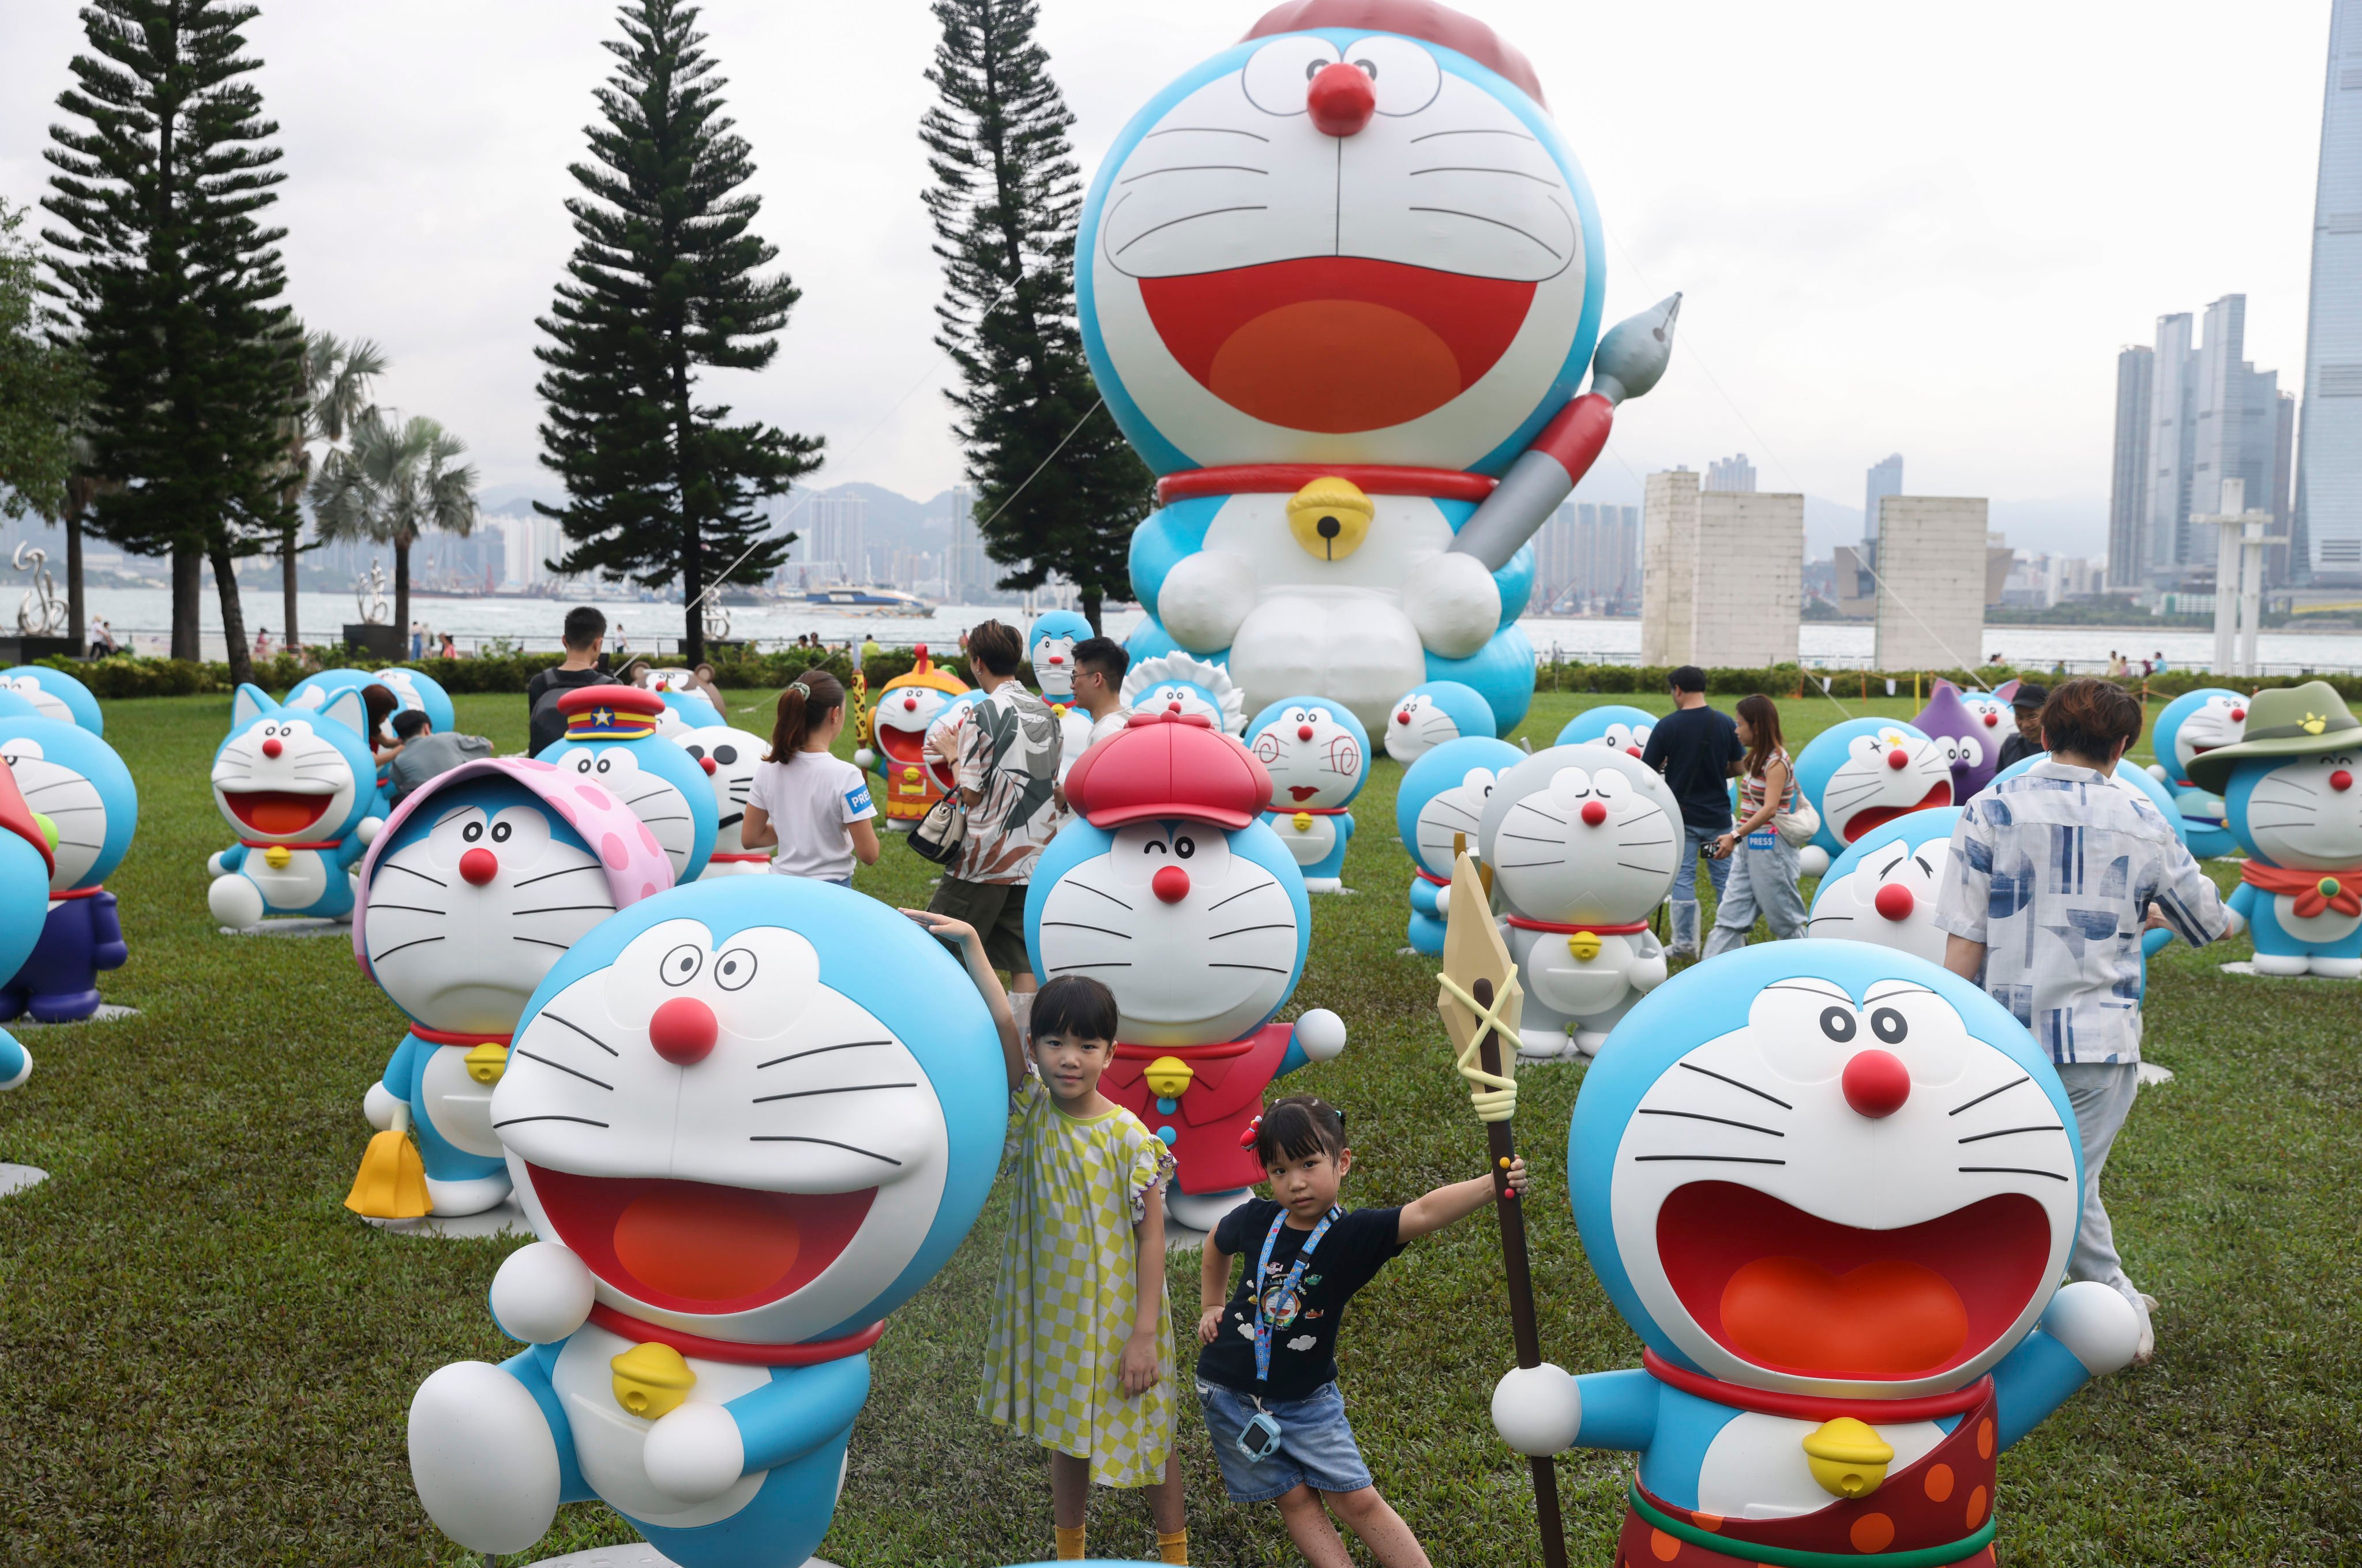 Doraemon figures have taken over Hong Kong. The famed robot cat from the future has hundreds of useful inventions – what are some of the best food-related ones? Photo: Yik Yeung-man